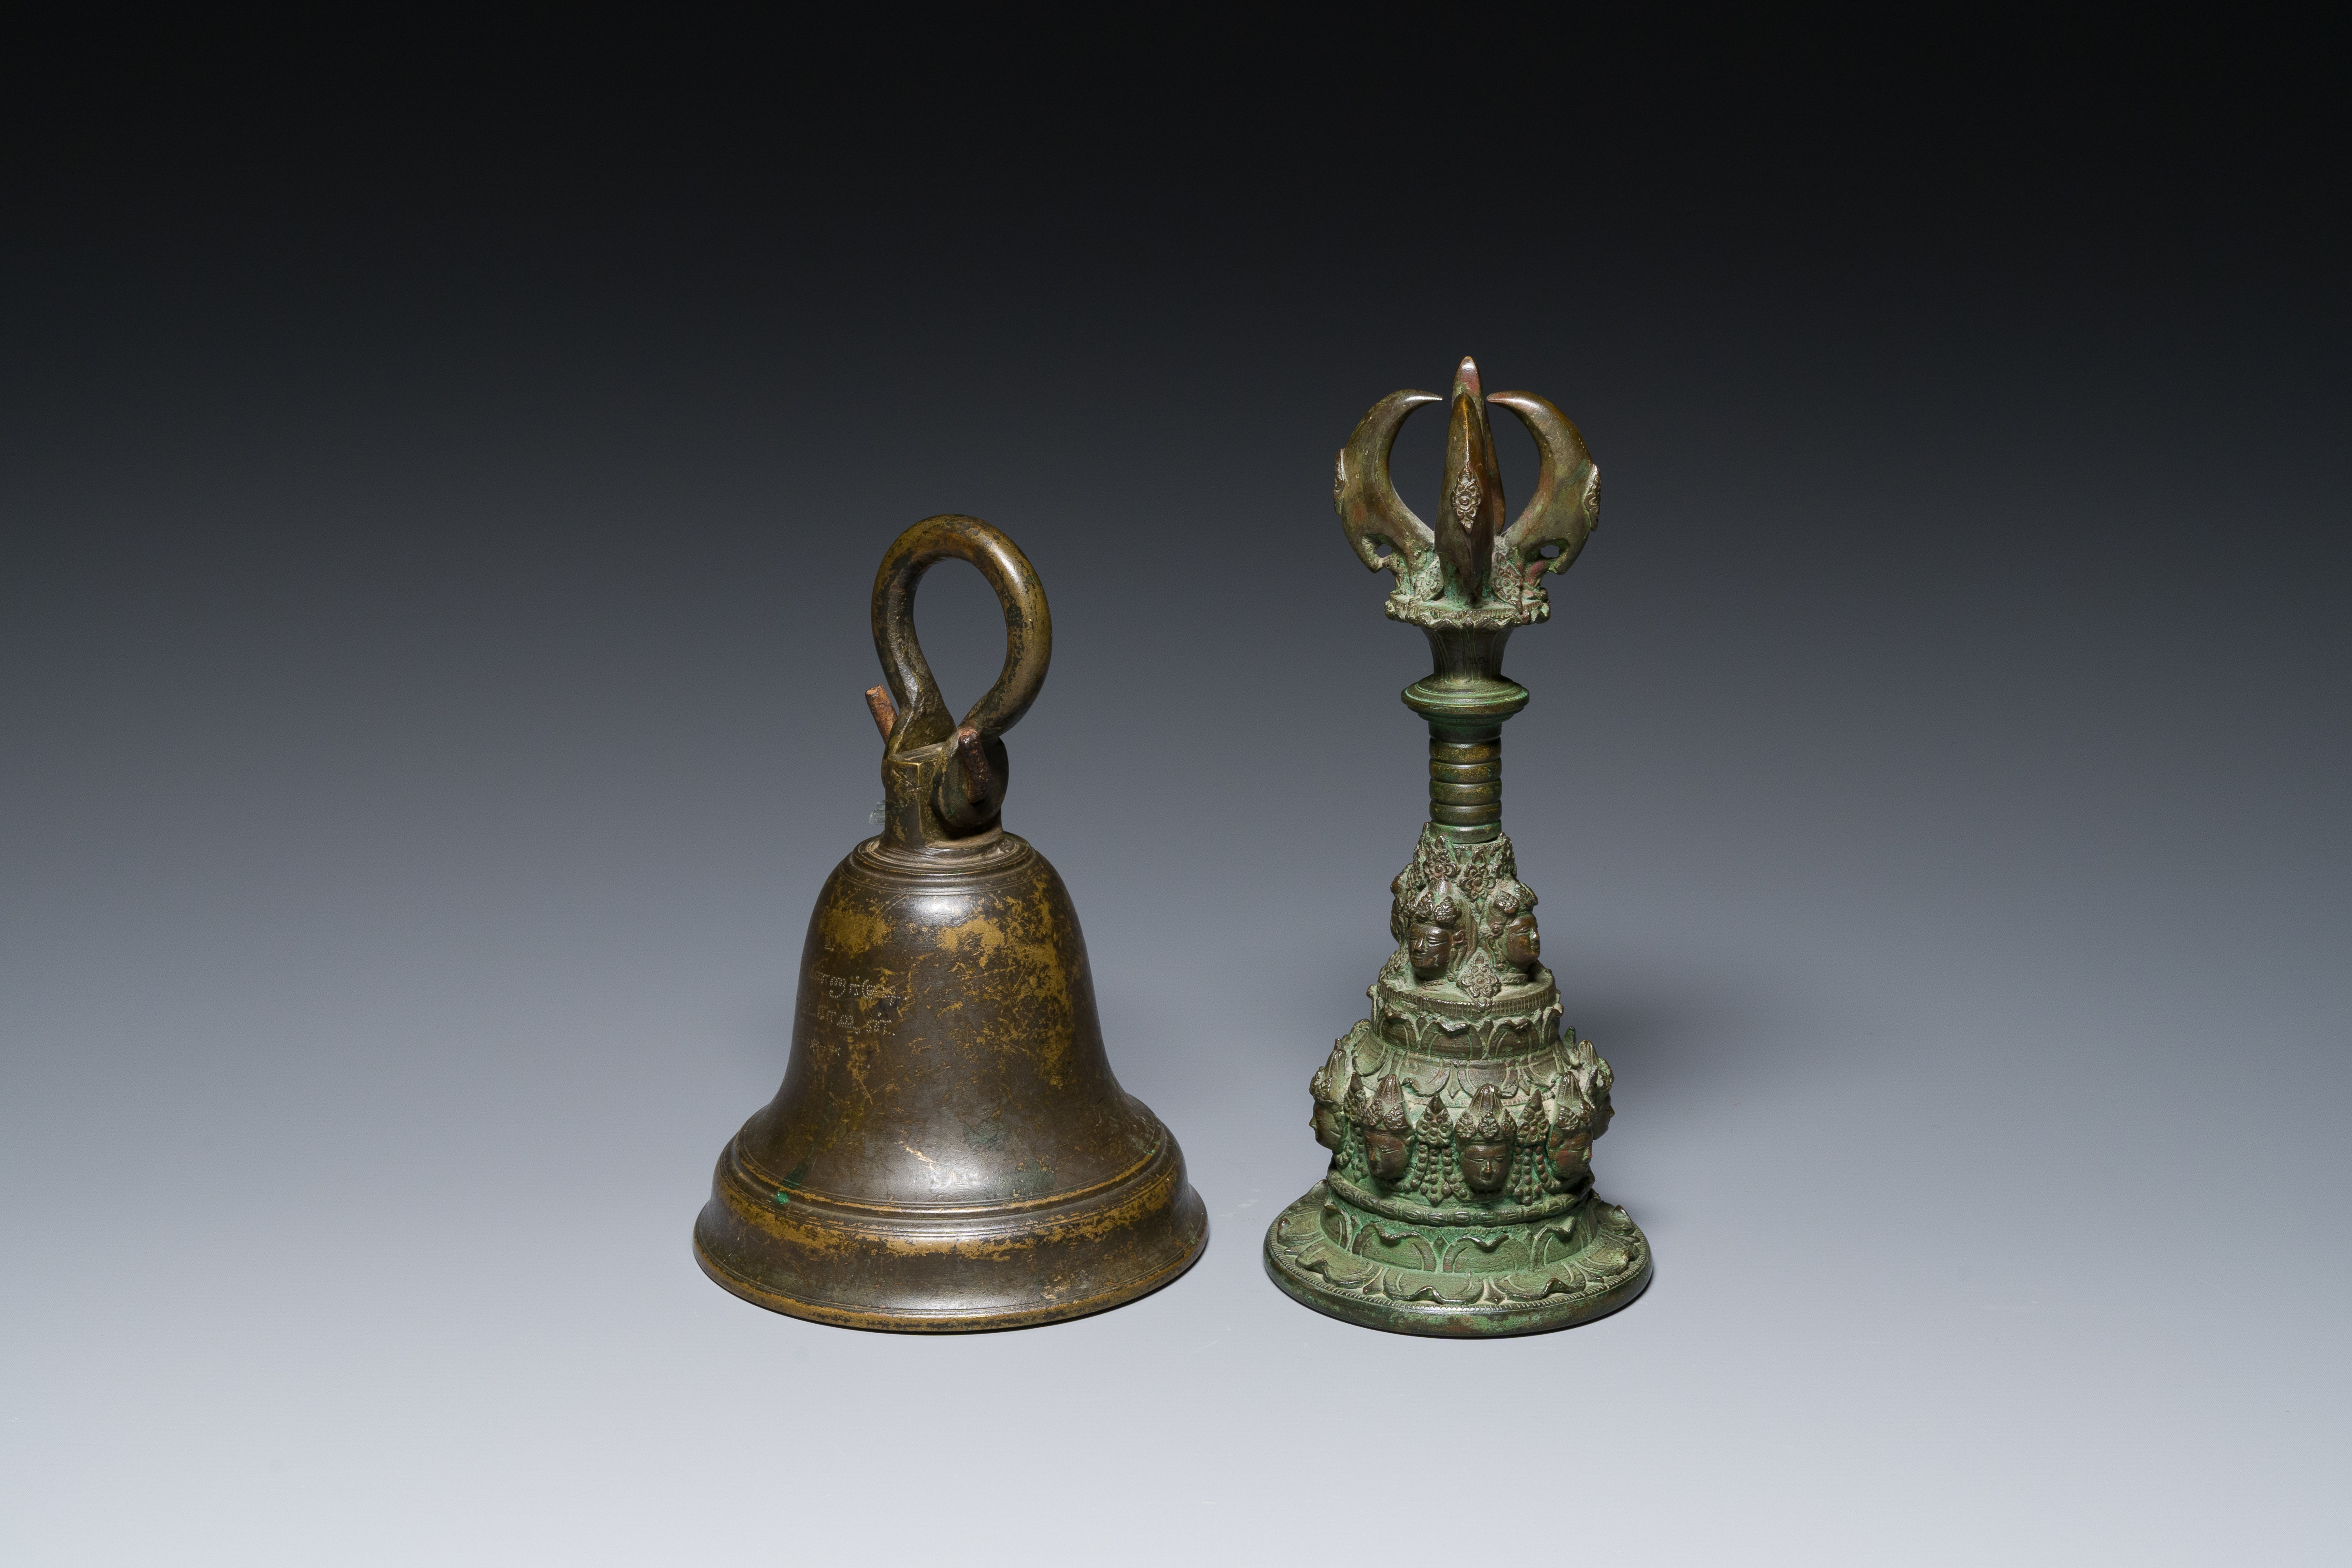 A bronze bell and a ceremonial hand bell, South Asia and Southeast Asia, 19th C. or earlier - Image 3 of 21